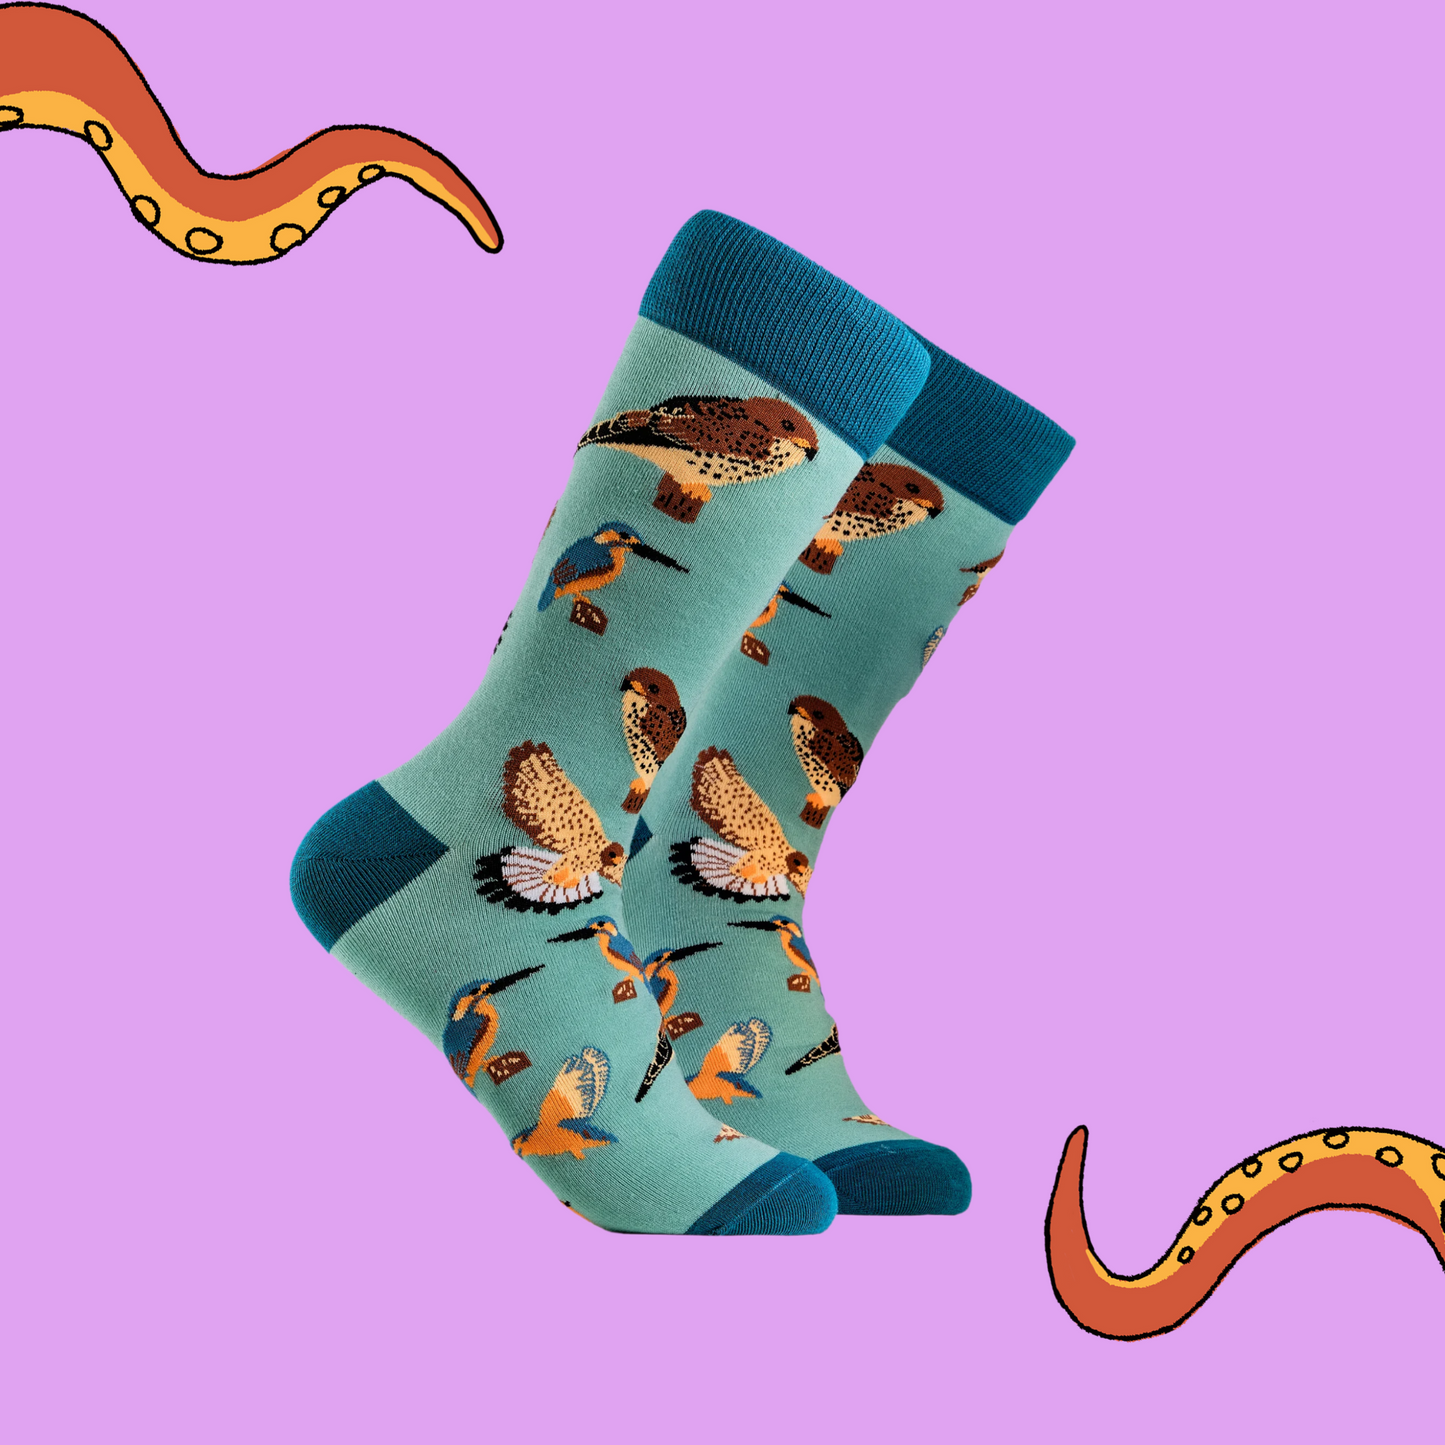 Bird Lover Socks. A pair of socks depicting British native birds. Teal legs, turquoise cuff, heel and toe.